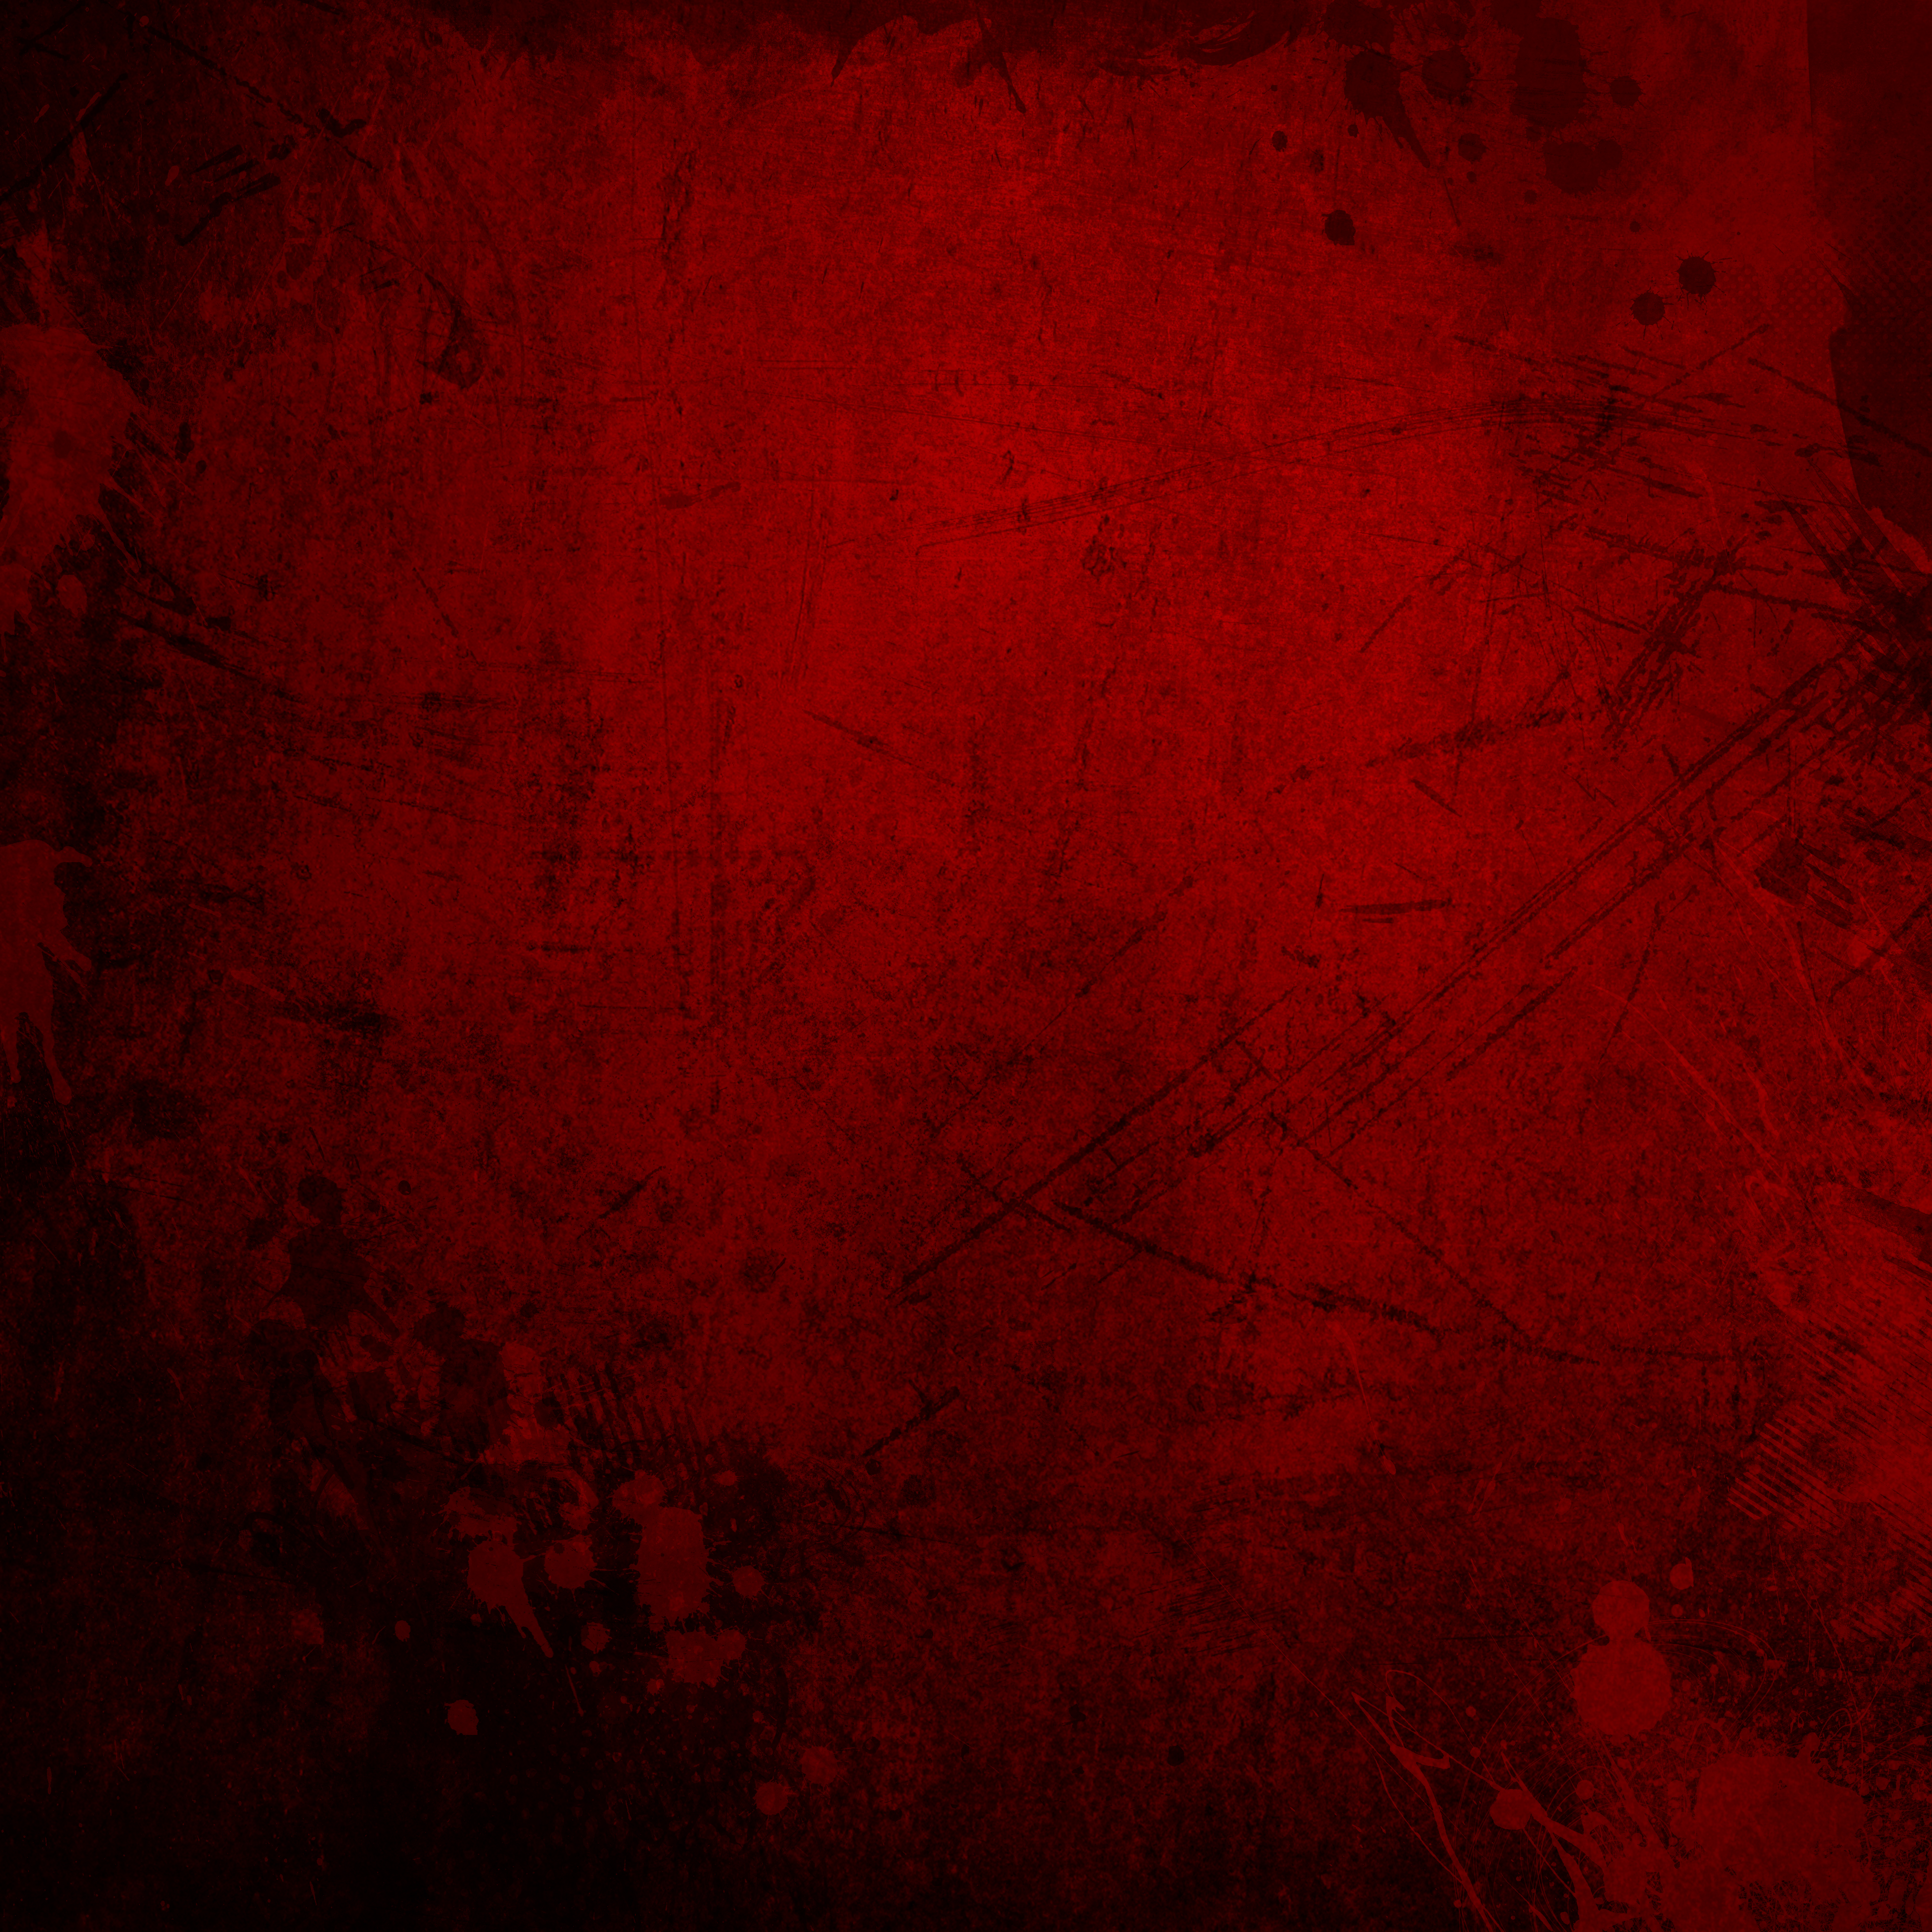 red grunge blood stained wallpaper